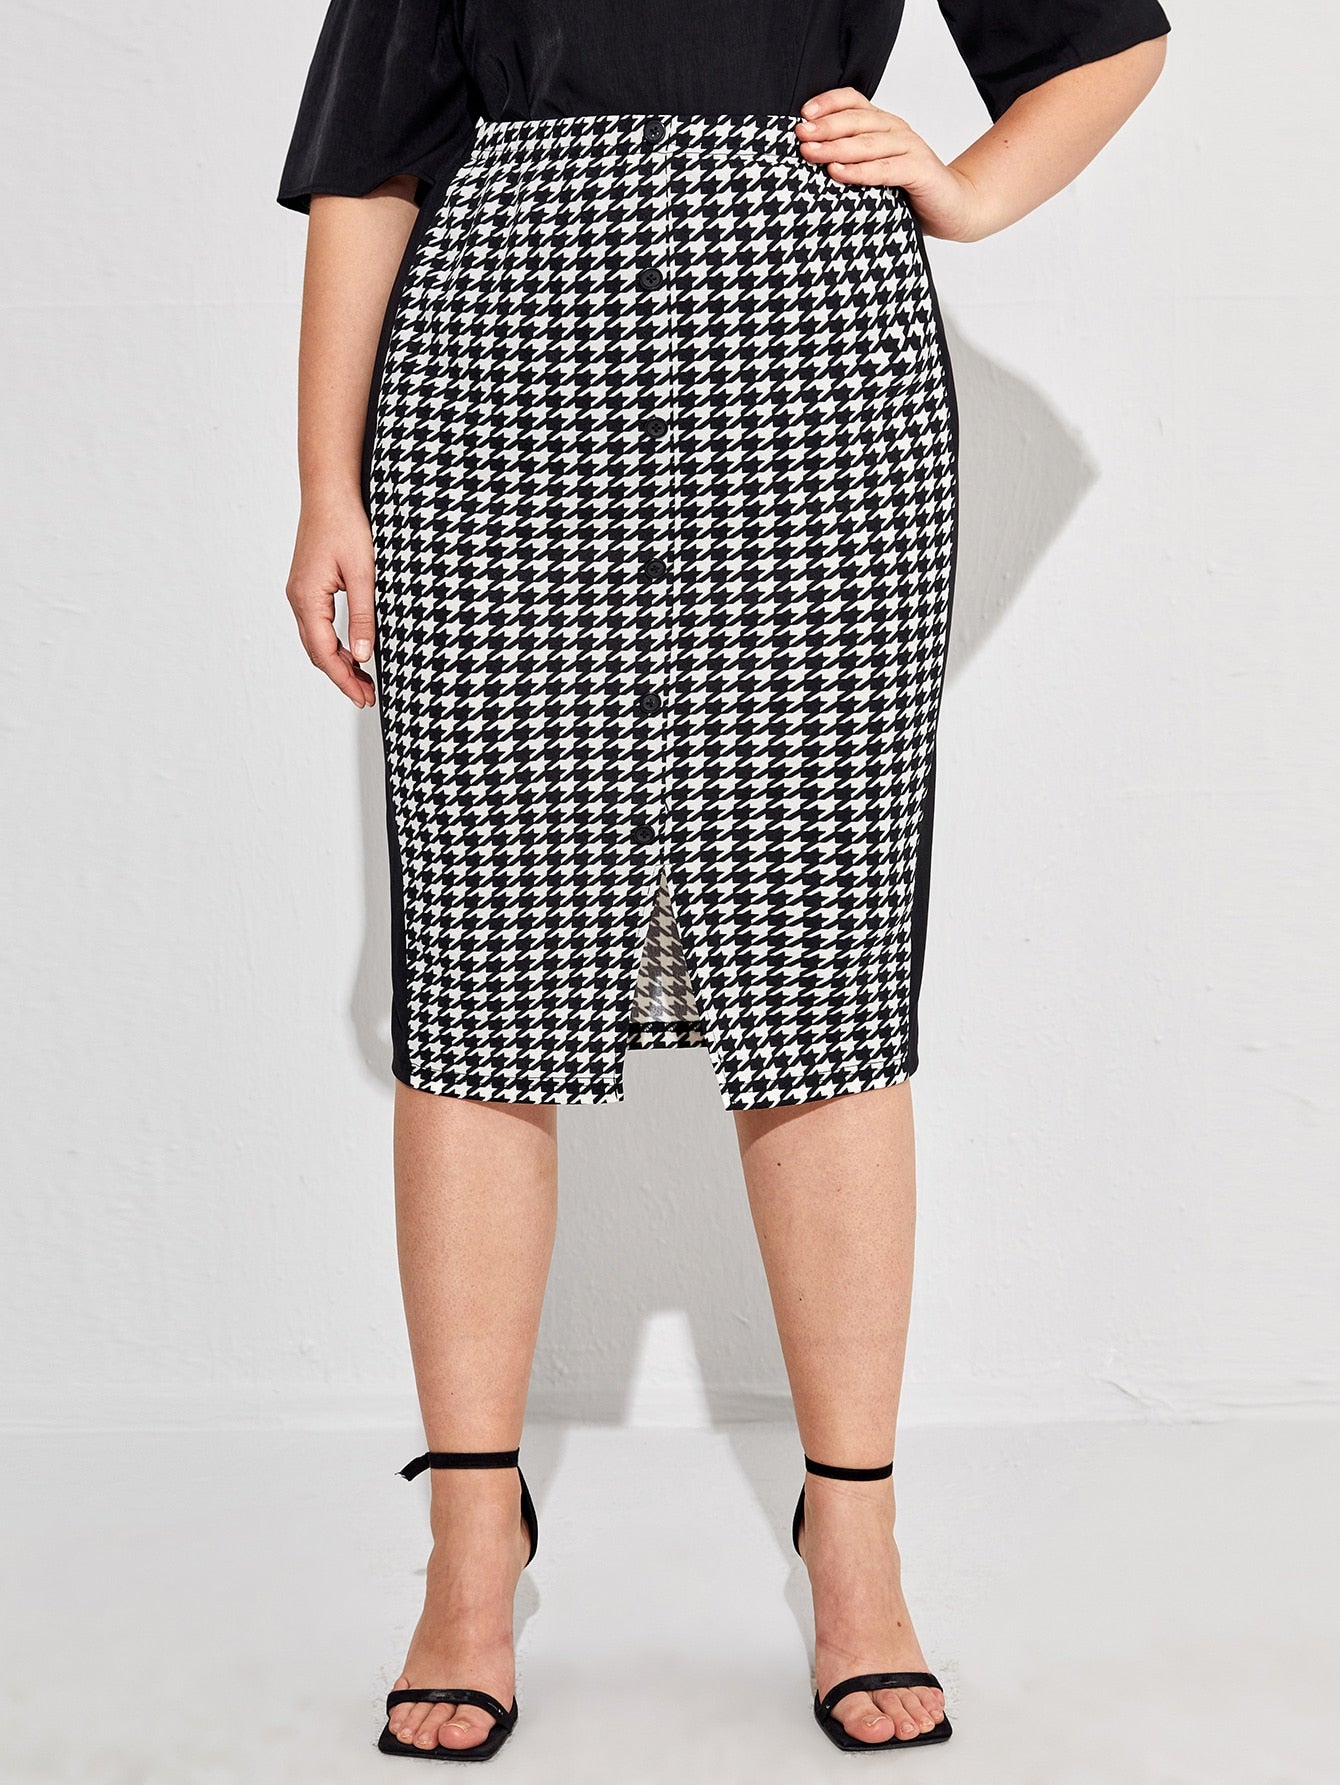 Plus Size Skirts Manufacturers